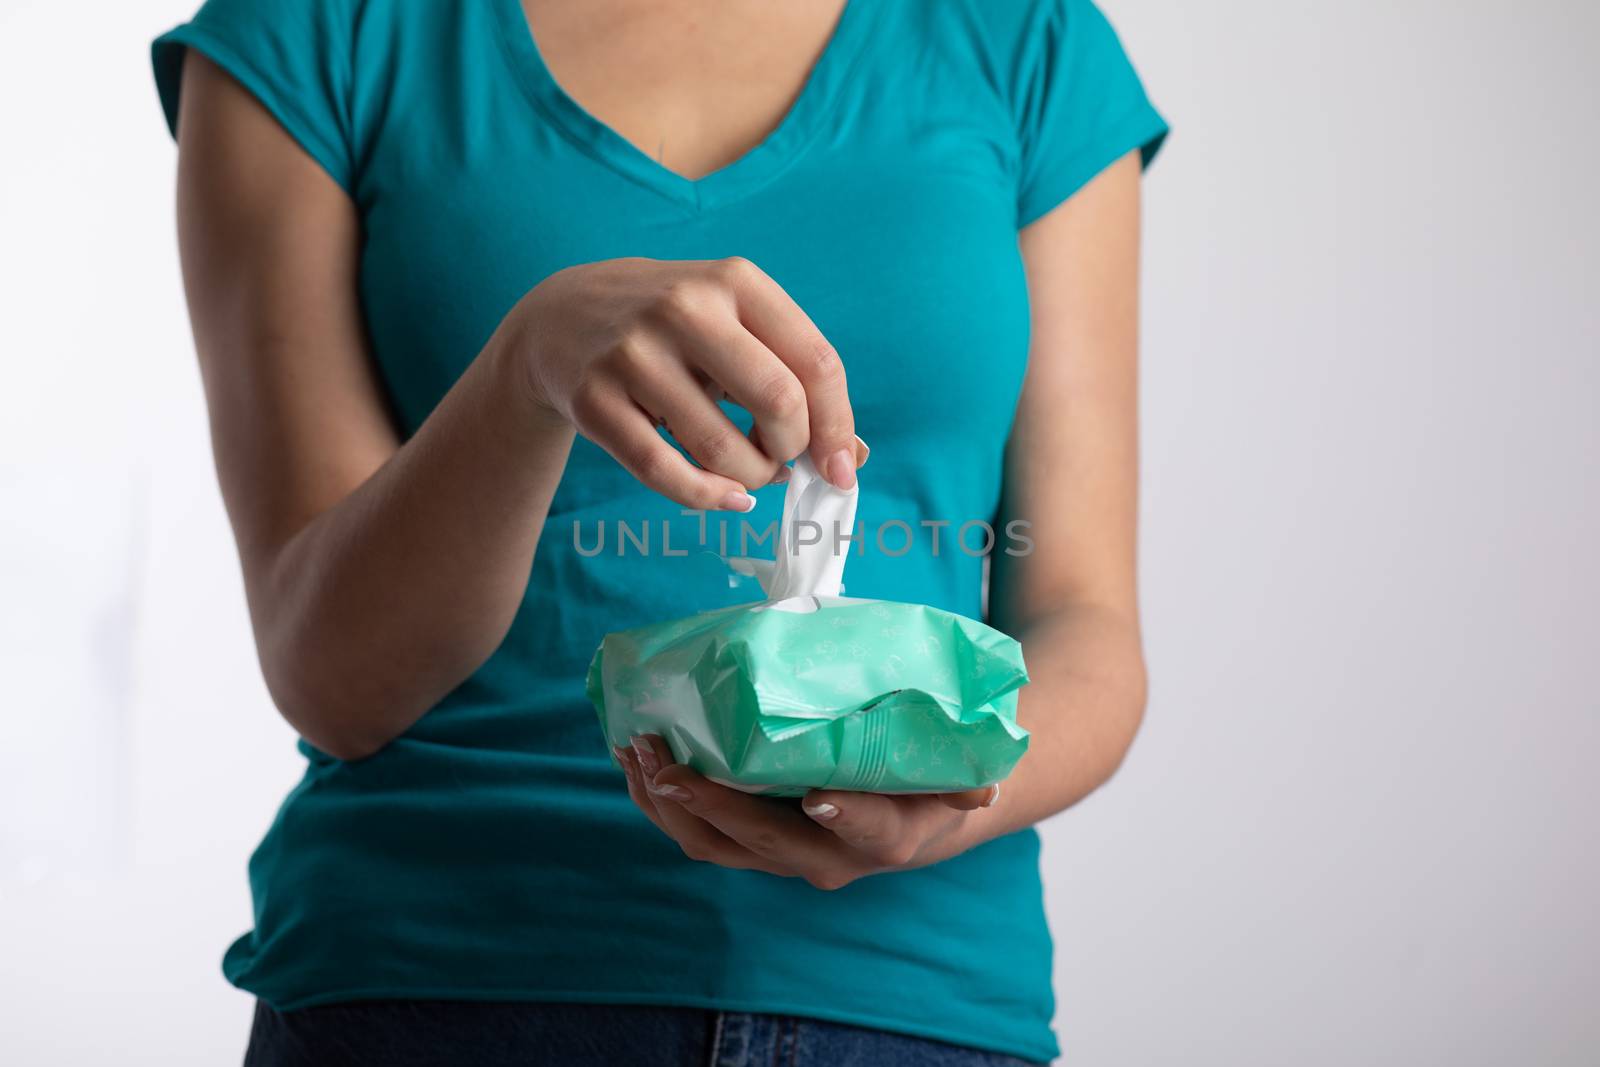 Taking baby wipes from the packaging - hygiene procedure and pre by adamr